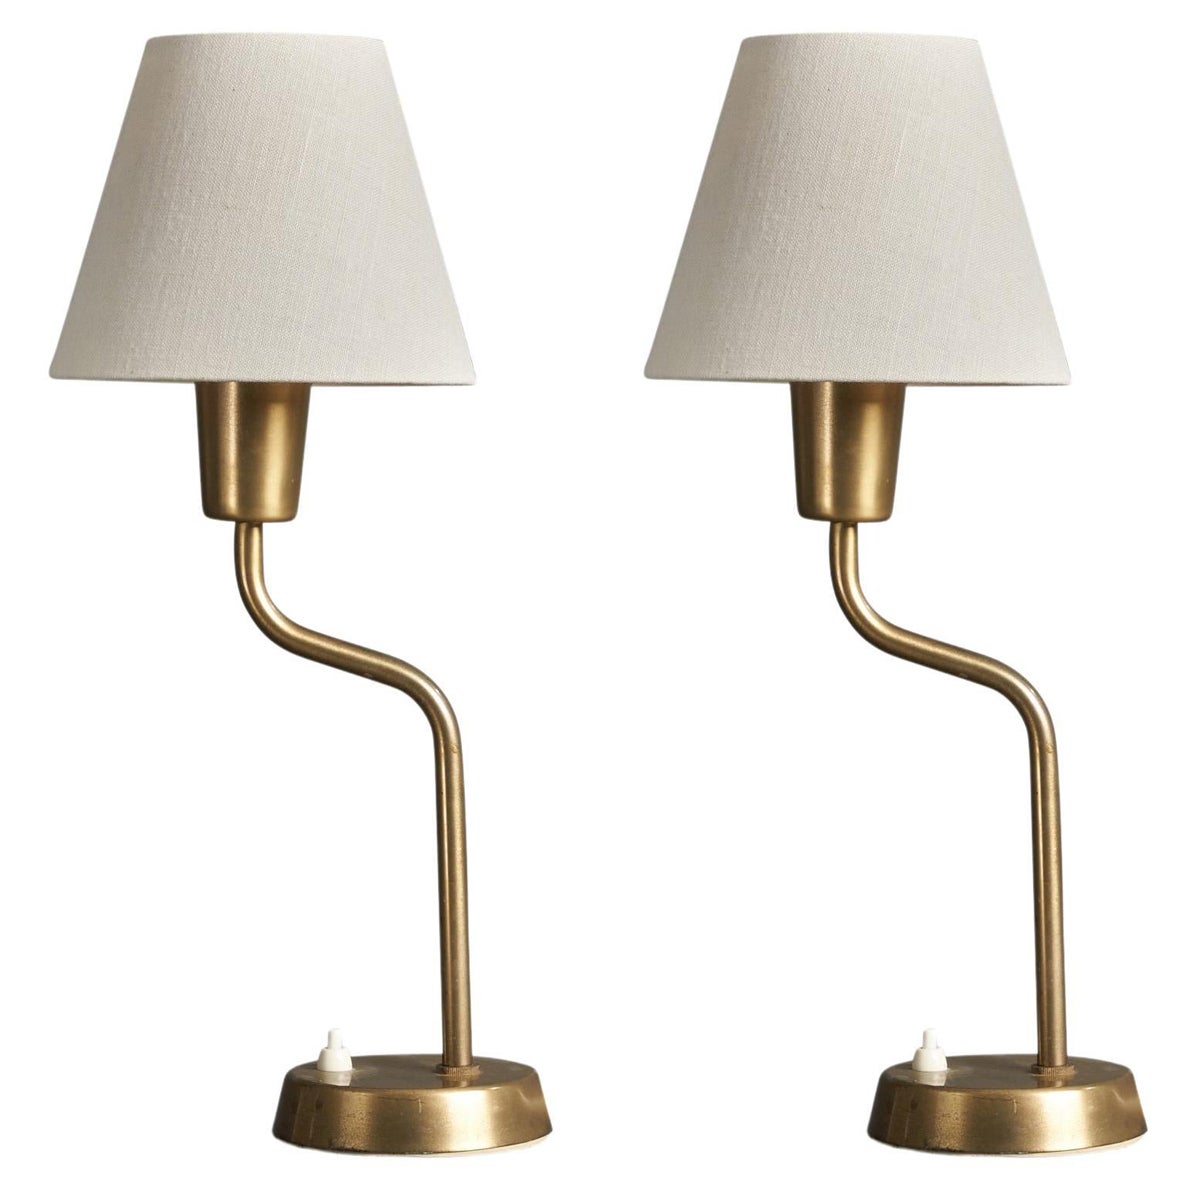 ASEA, Table Lamps, Brass, Fabric, Sweden, 1940s For Sale